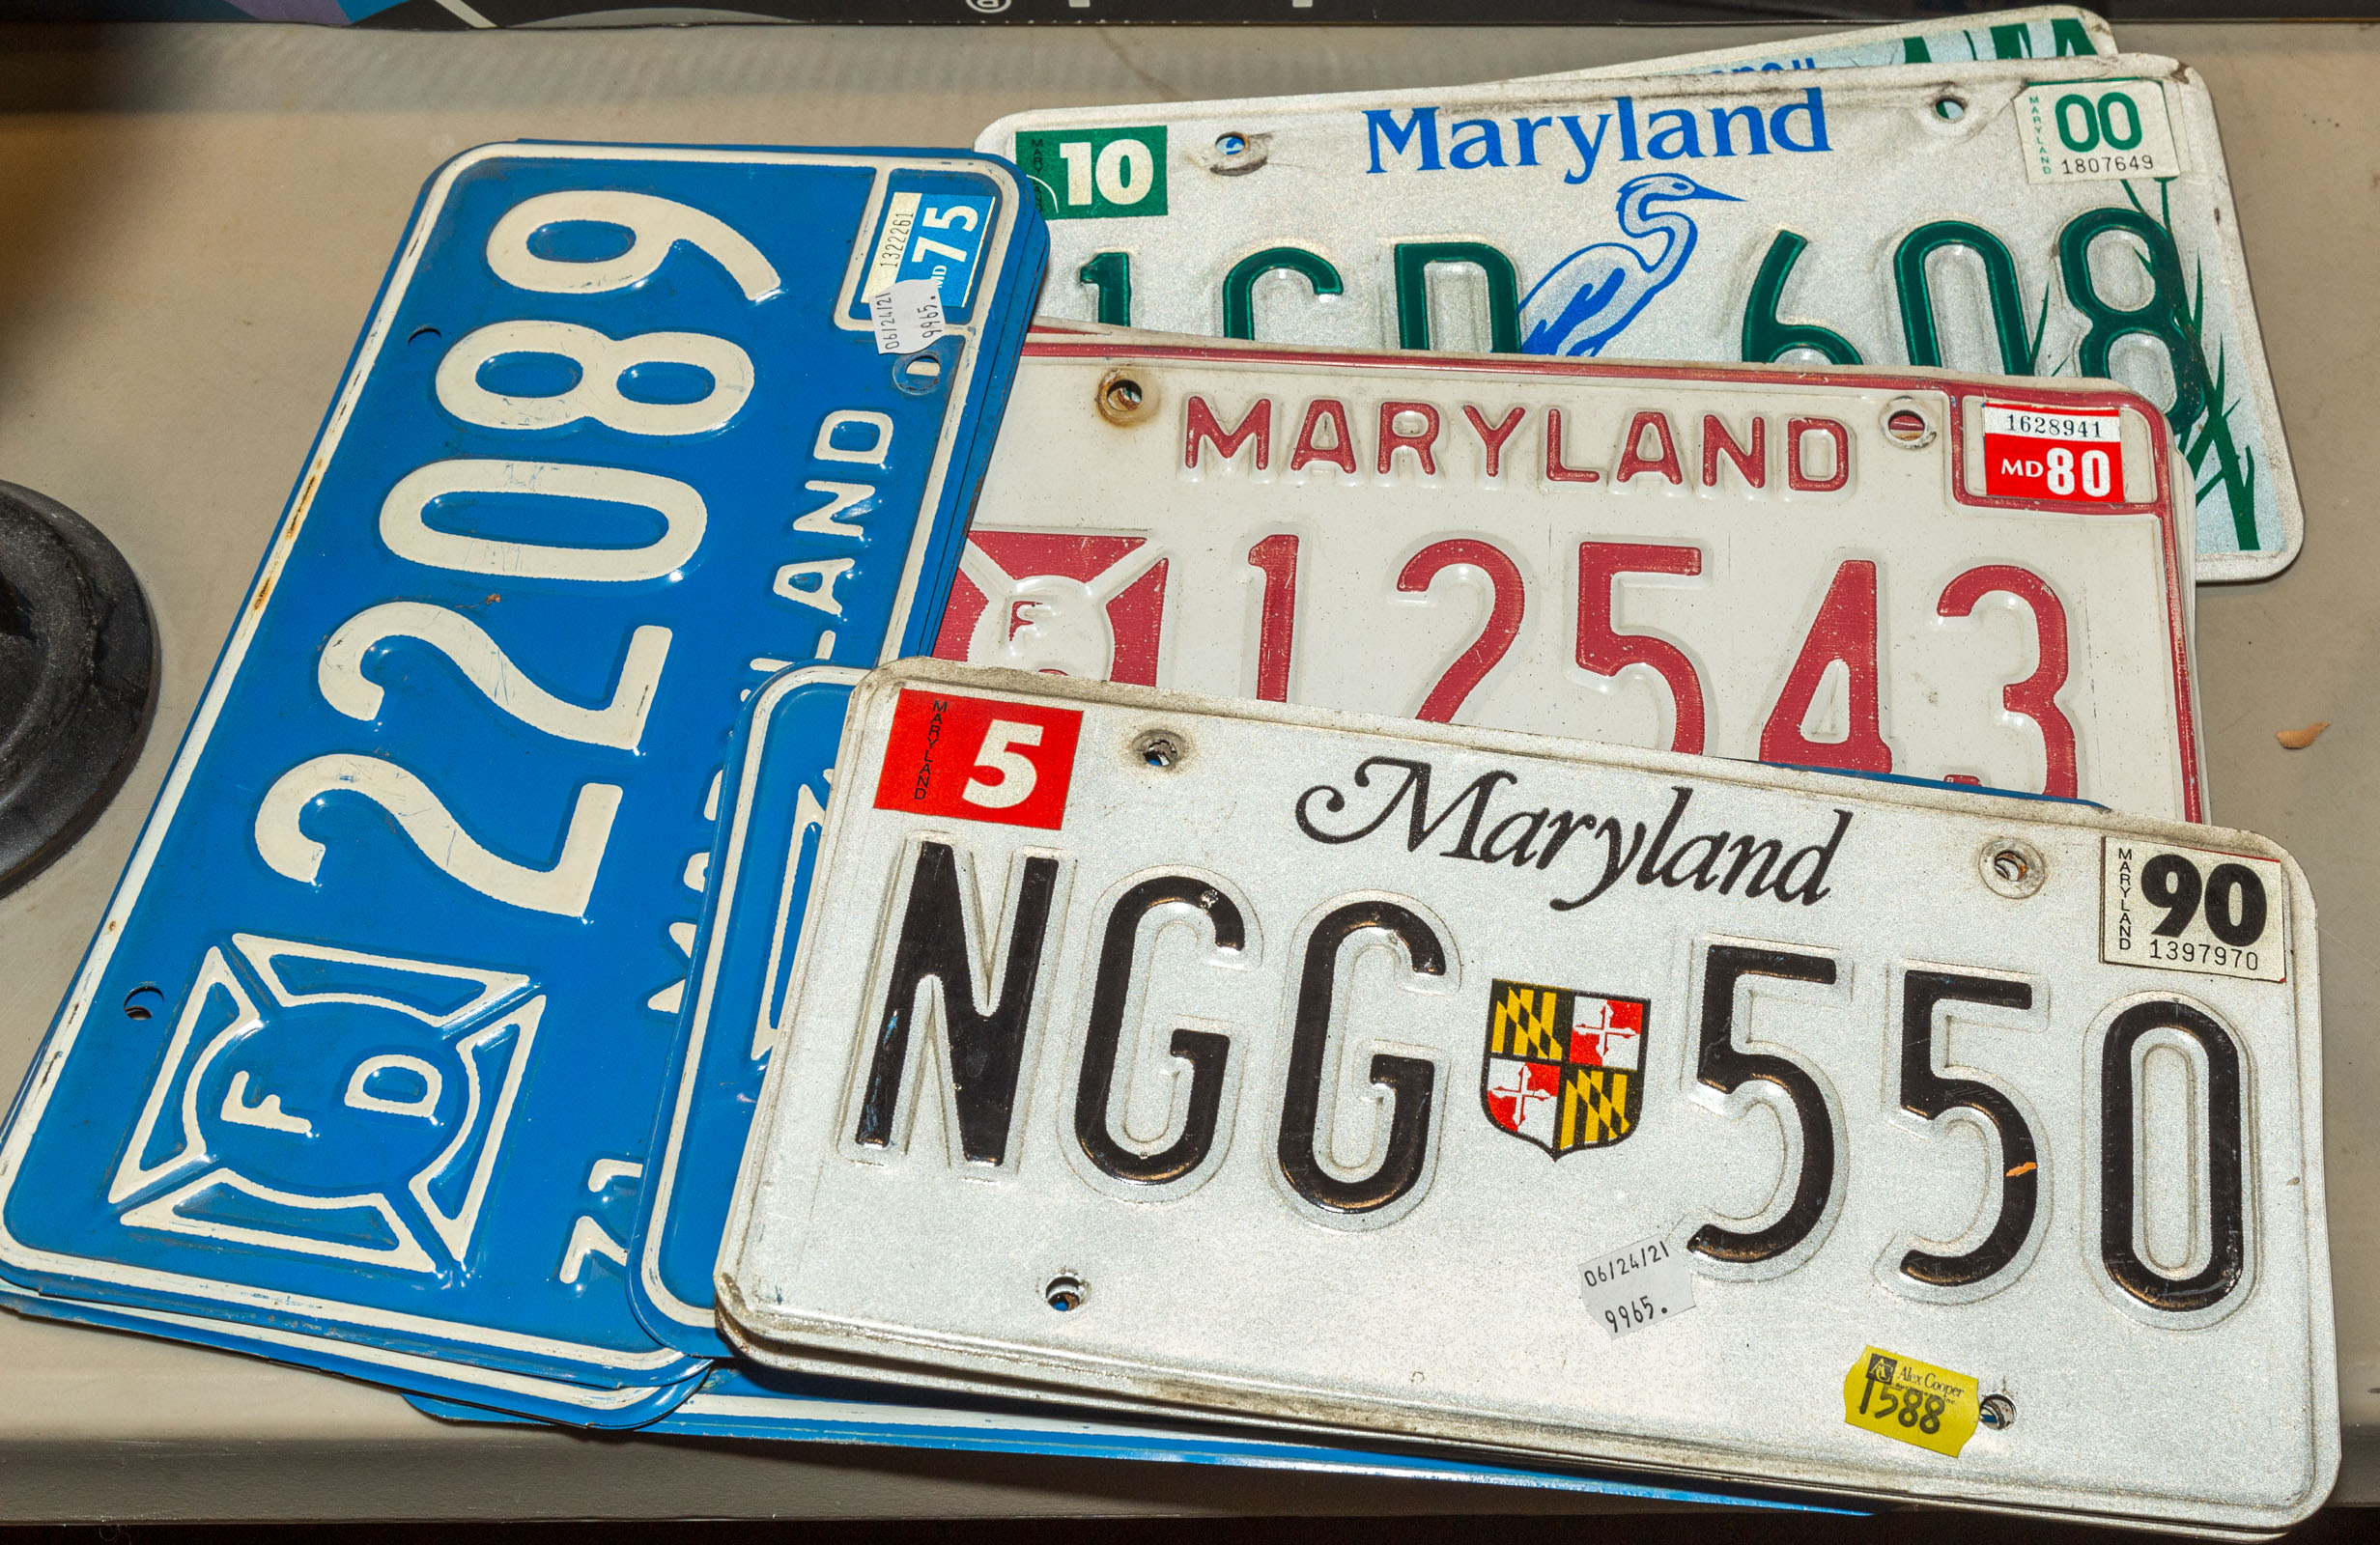 GROUP OF MARYLAND LICENSE PLATES